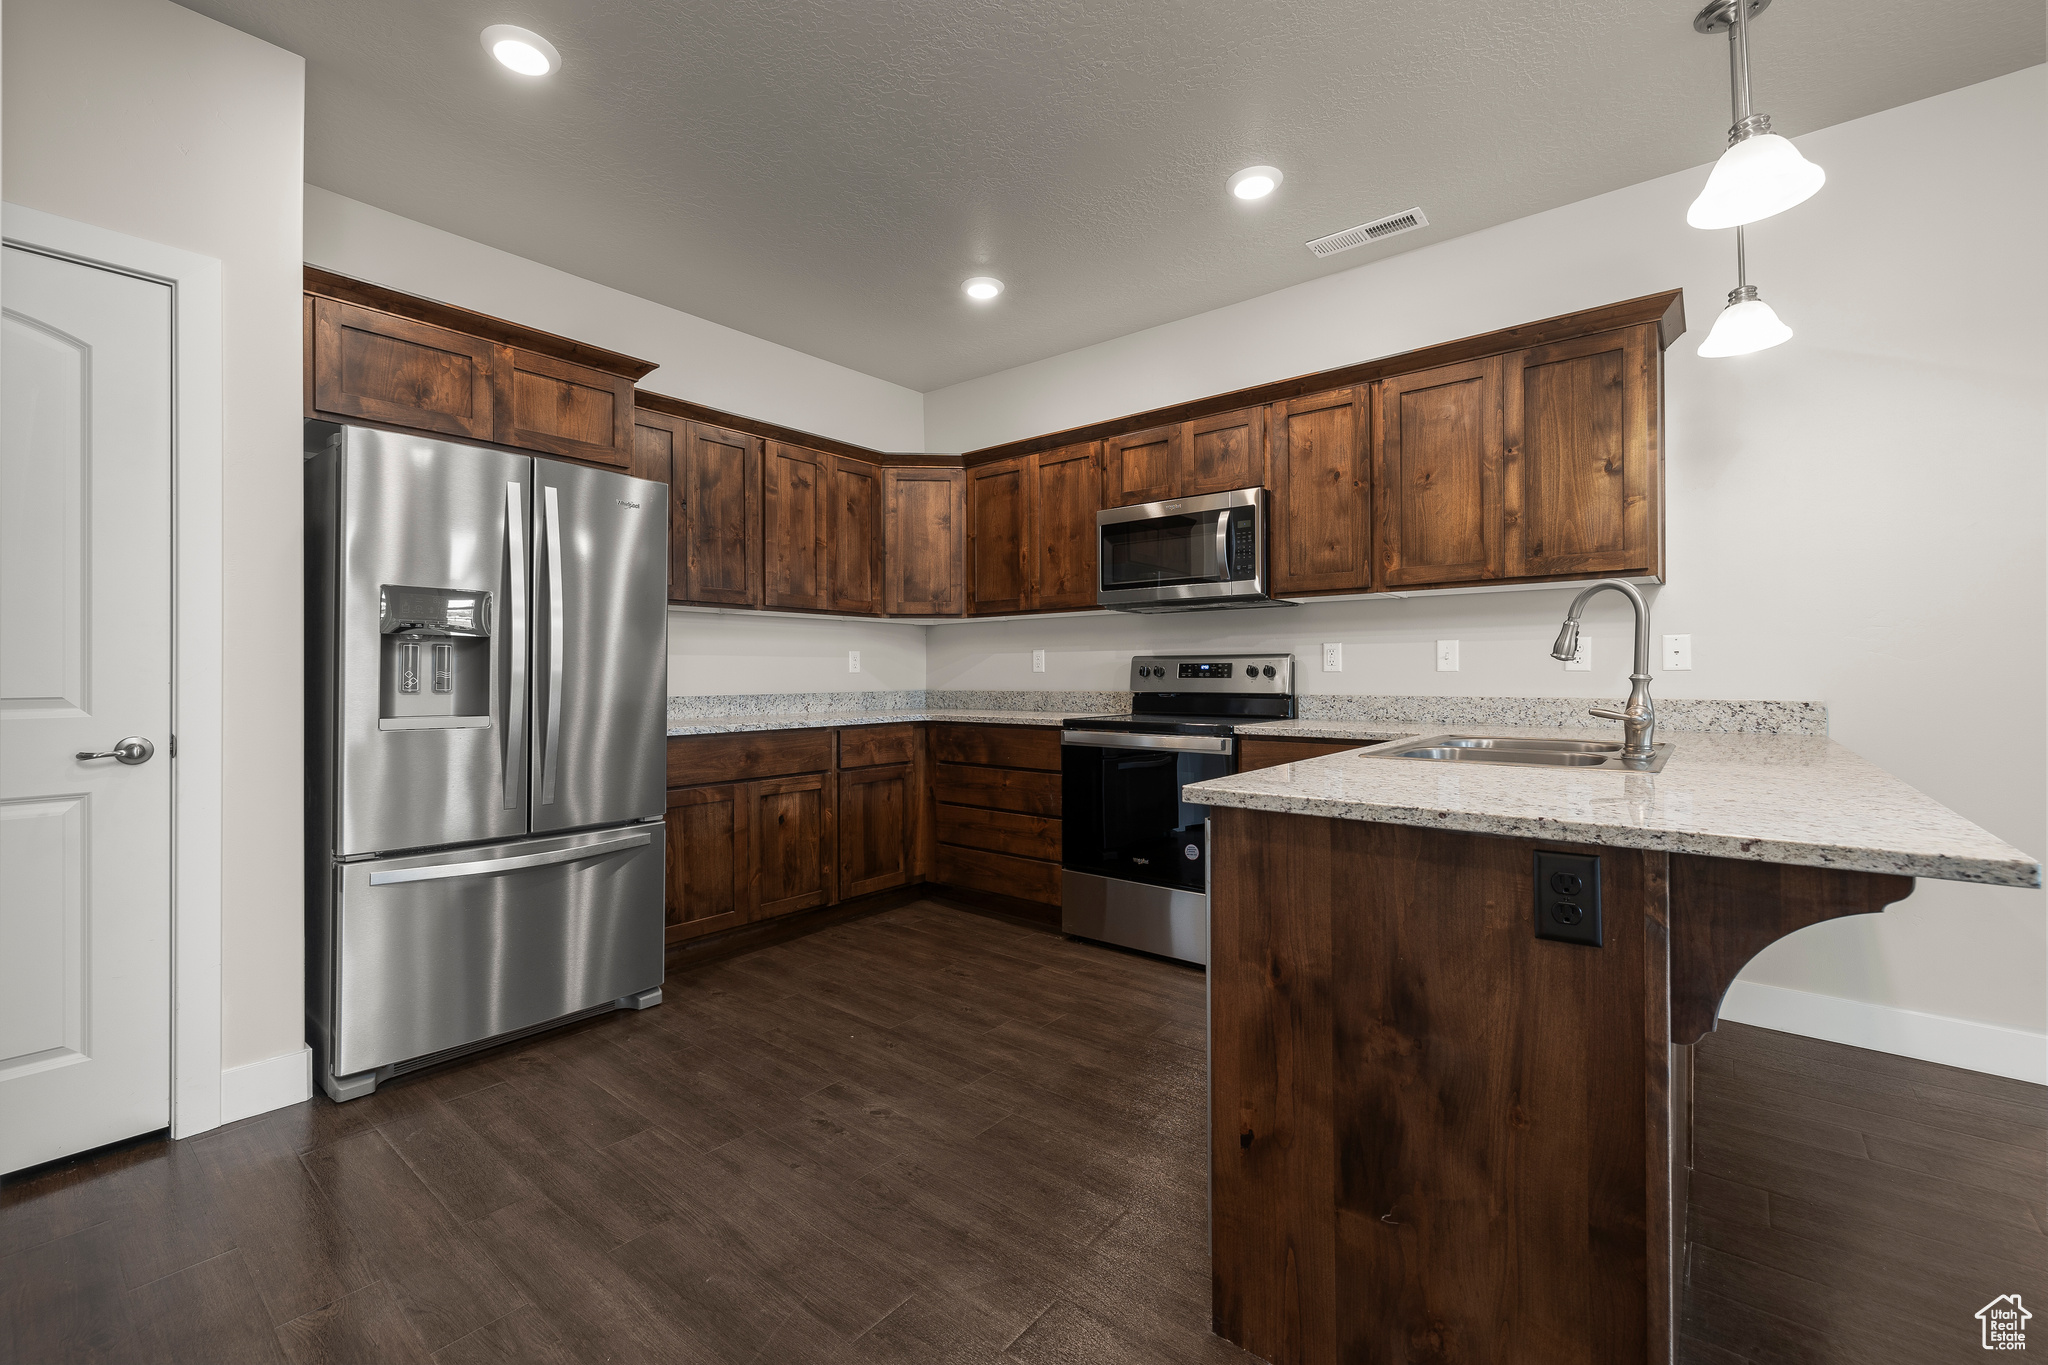 Kitchen with stainless steel appliances and granite counters. Fridge included!